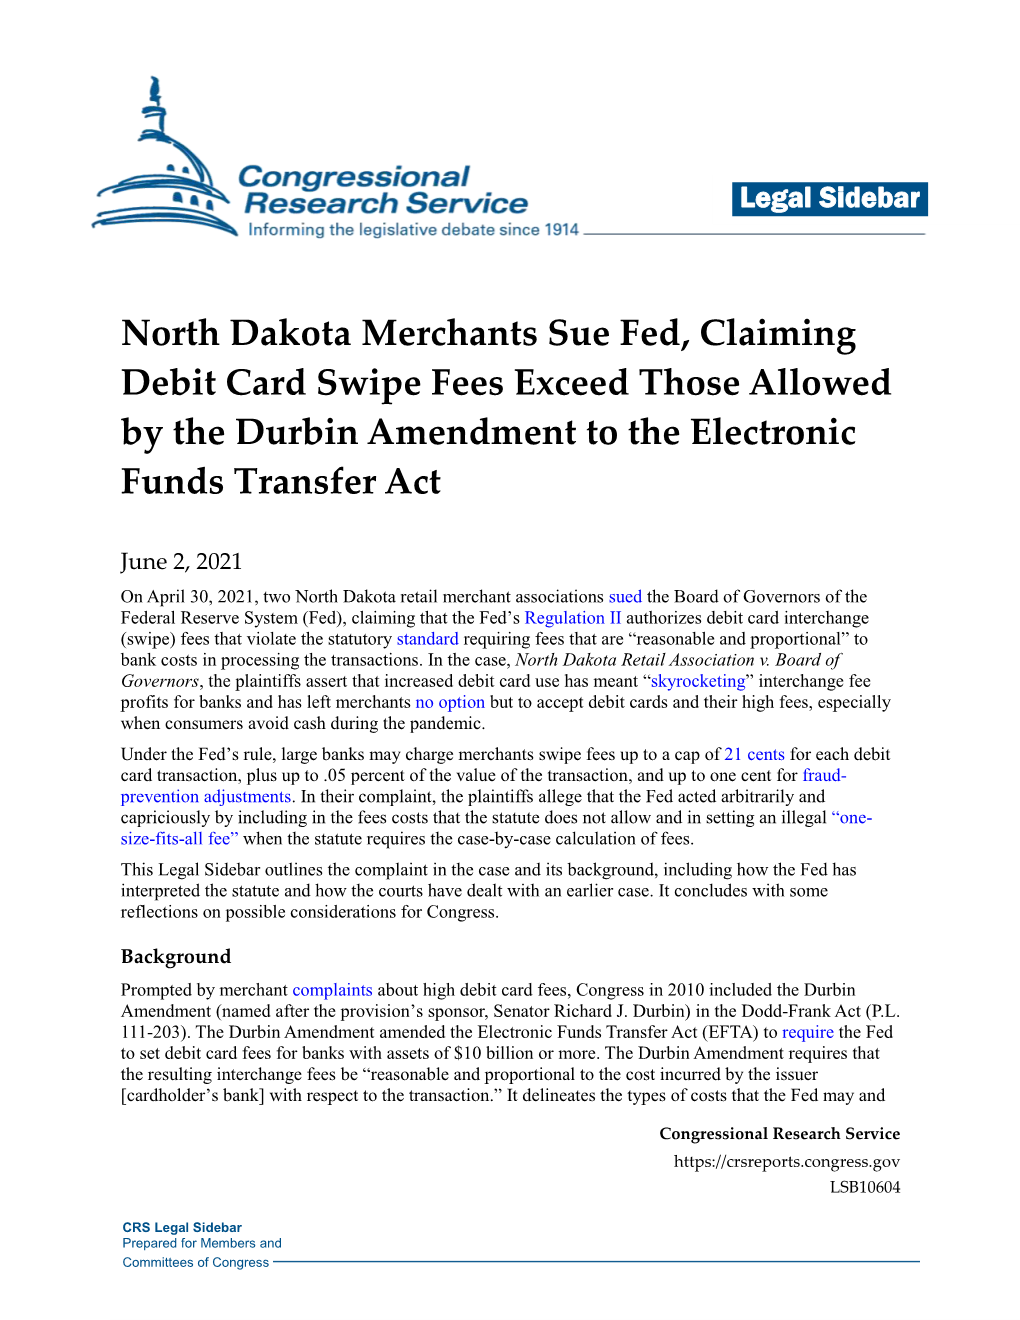 North Dakota Merchants Sue Fed, Claiming Debit Card Swipe Fees Exceed Those Allowed by the Durbin Amendment to the Electronic Funds Transfer Act